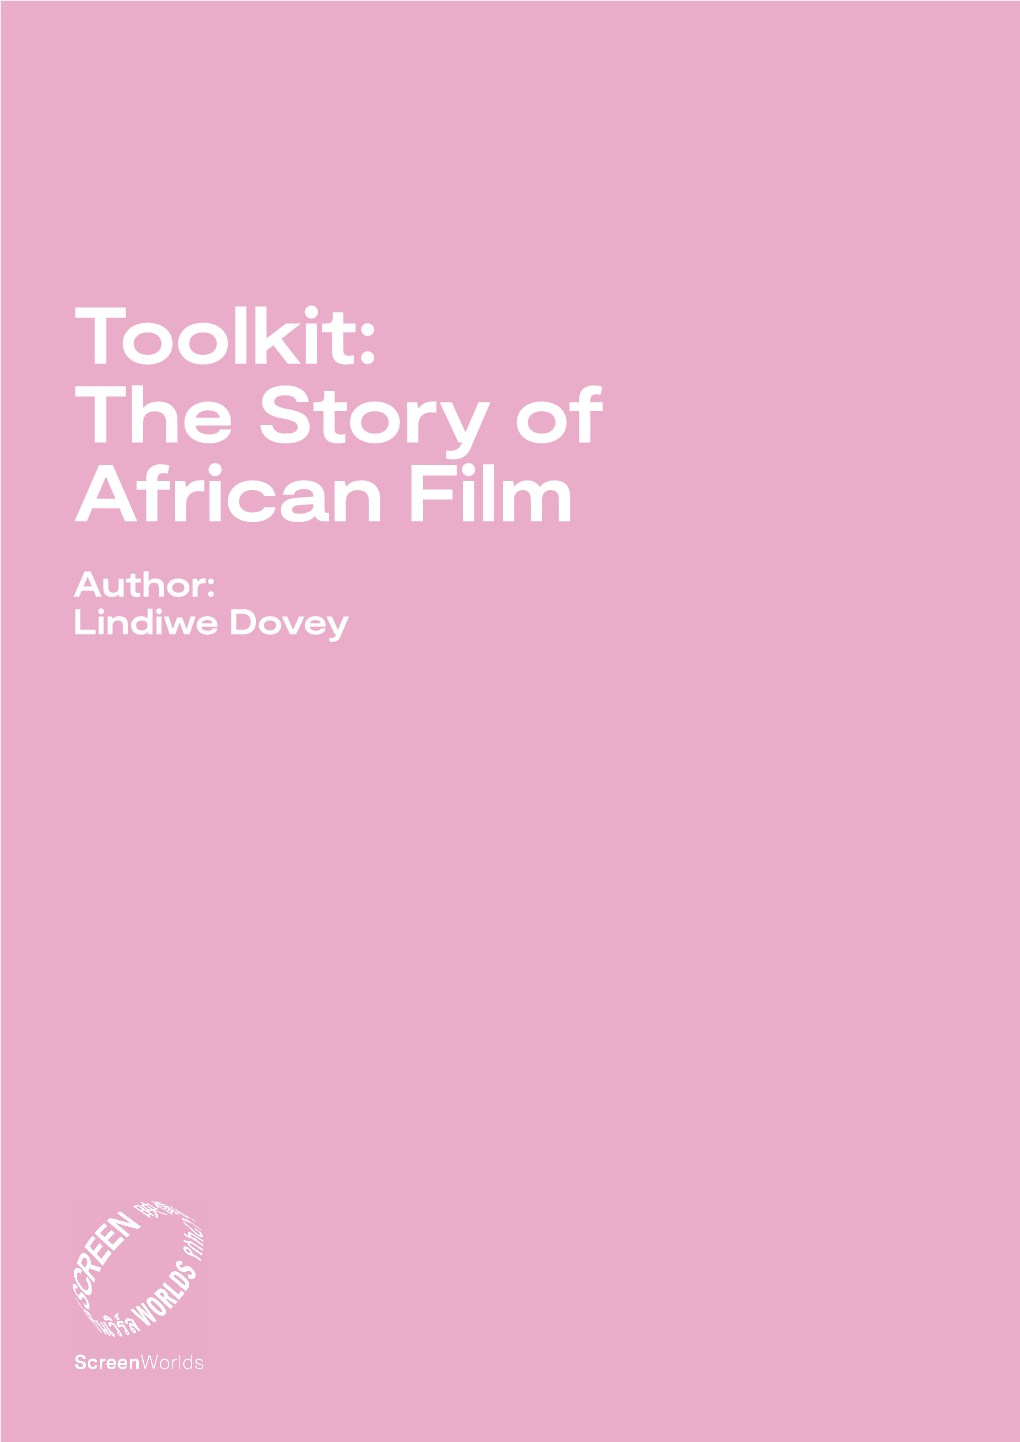 Toolkit: the Story of African Film Author: Lindiwe Dovey Toolkit: the Story of African Film 2 by Lindiwe Dovey